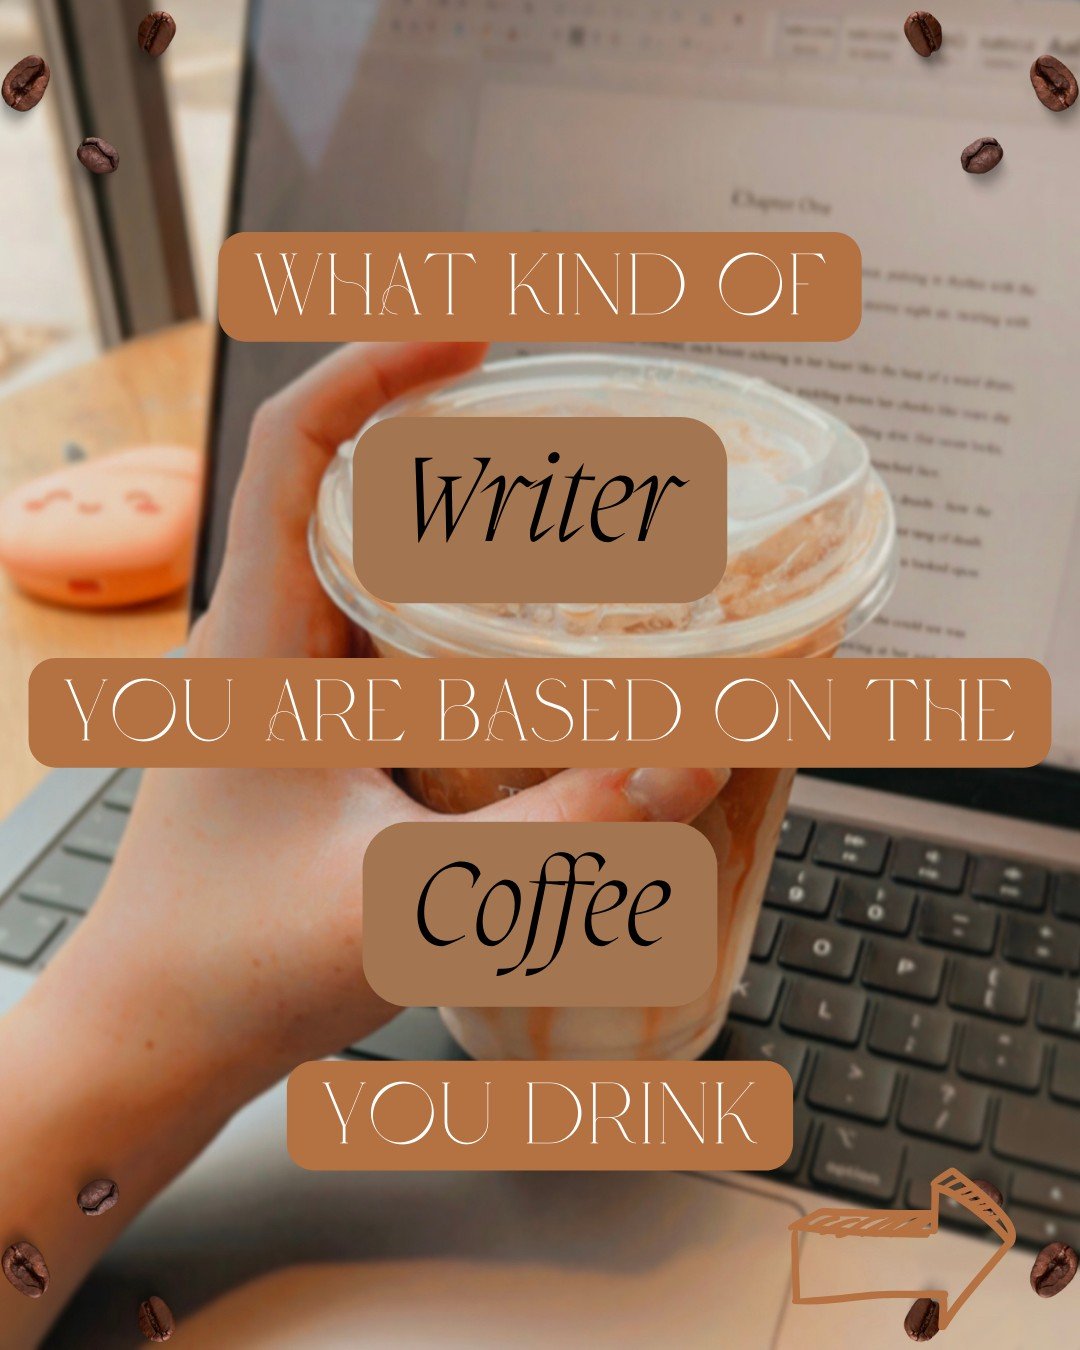 Curious about what kind of writer you are based on the coffee you drink? 🤔🤎

☕ Frapp&eacute; &mdash; syrups, whipped cream, caramel or chocolate sauce...You appreciate the sweeter things in life. You likely write rom-coms or romance in general. You